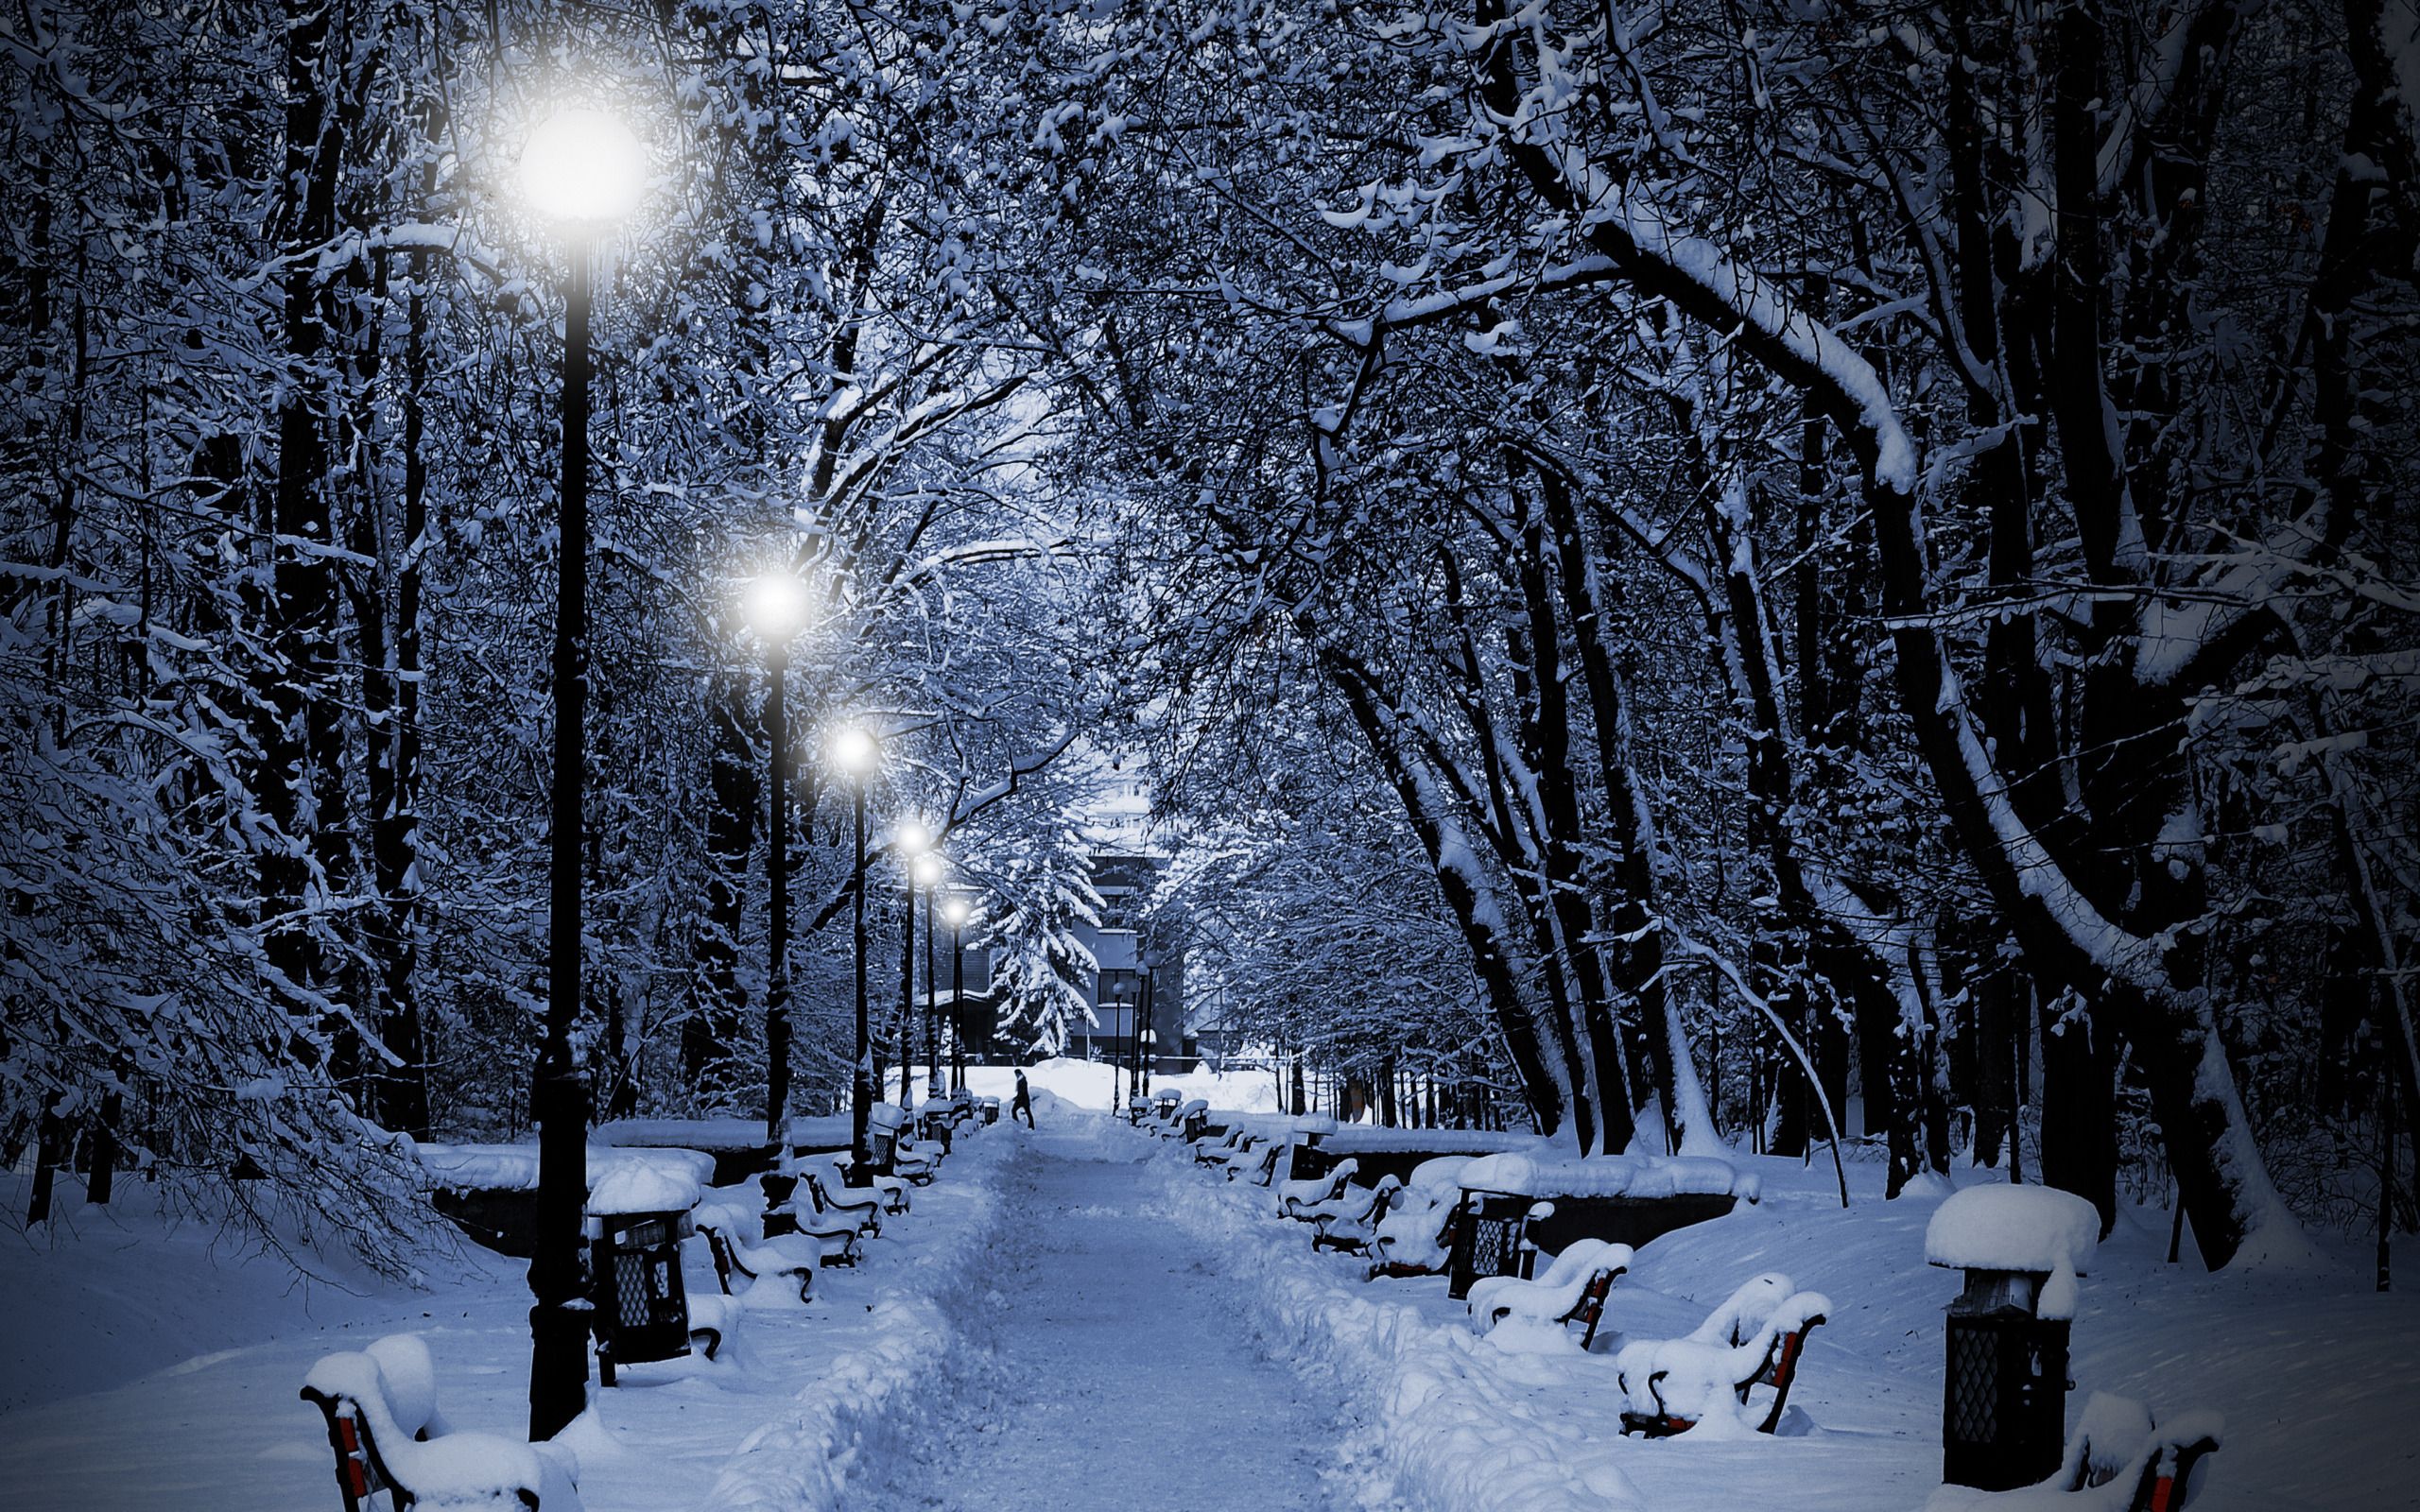 widescreen the park in winter photos free tablet pc 2560×1600 |